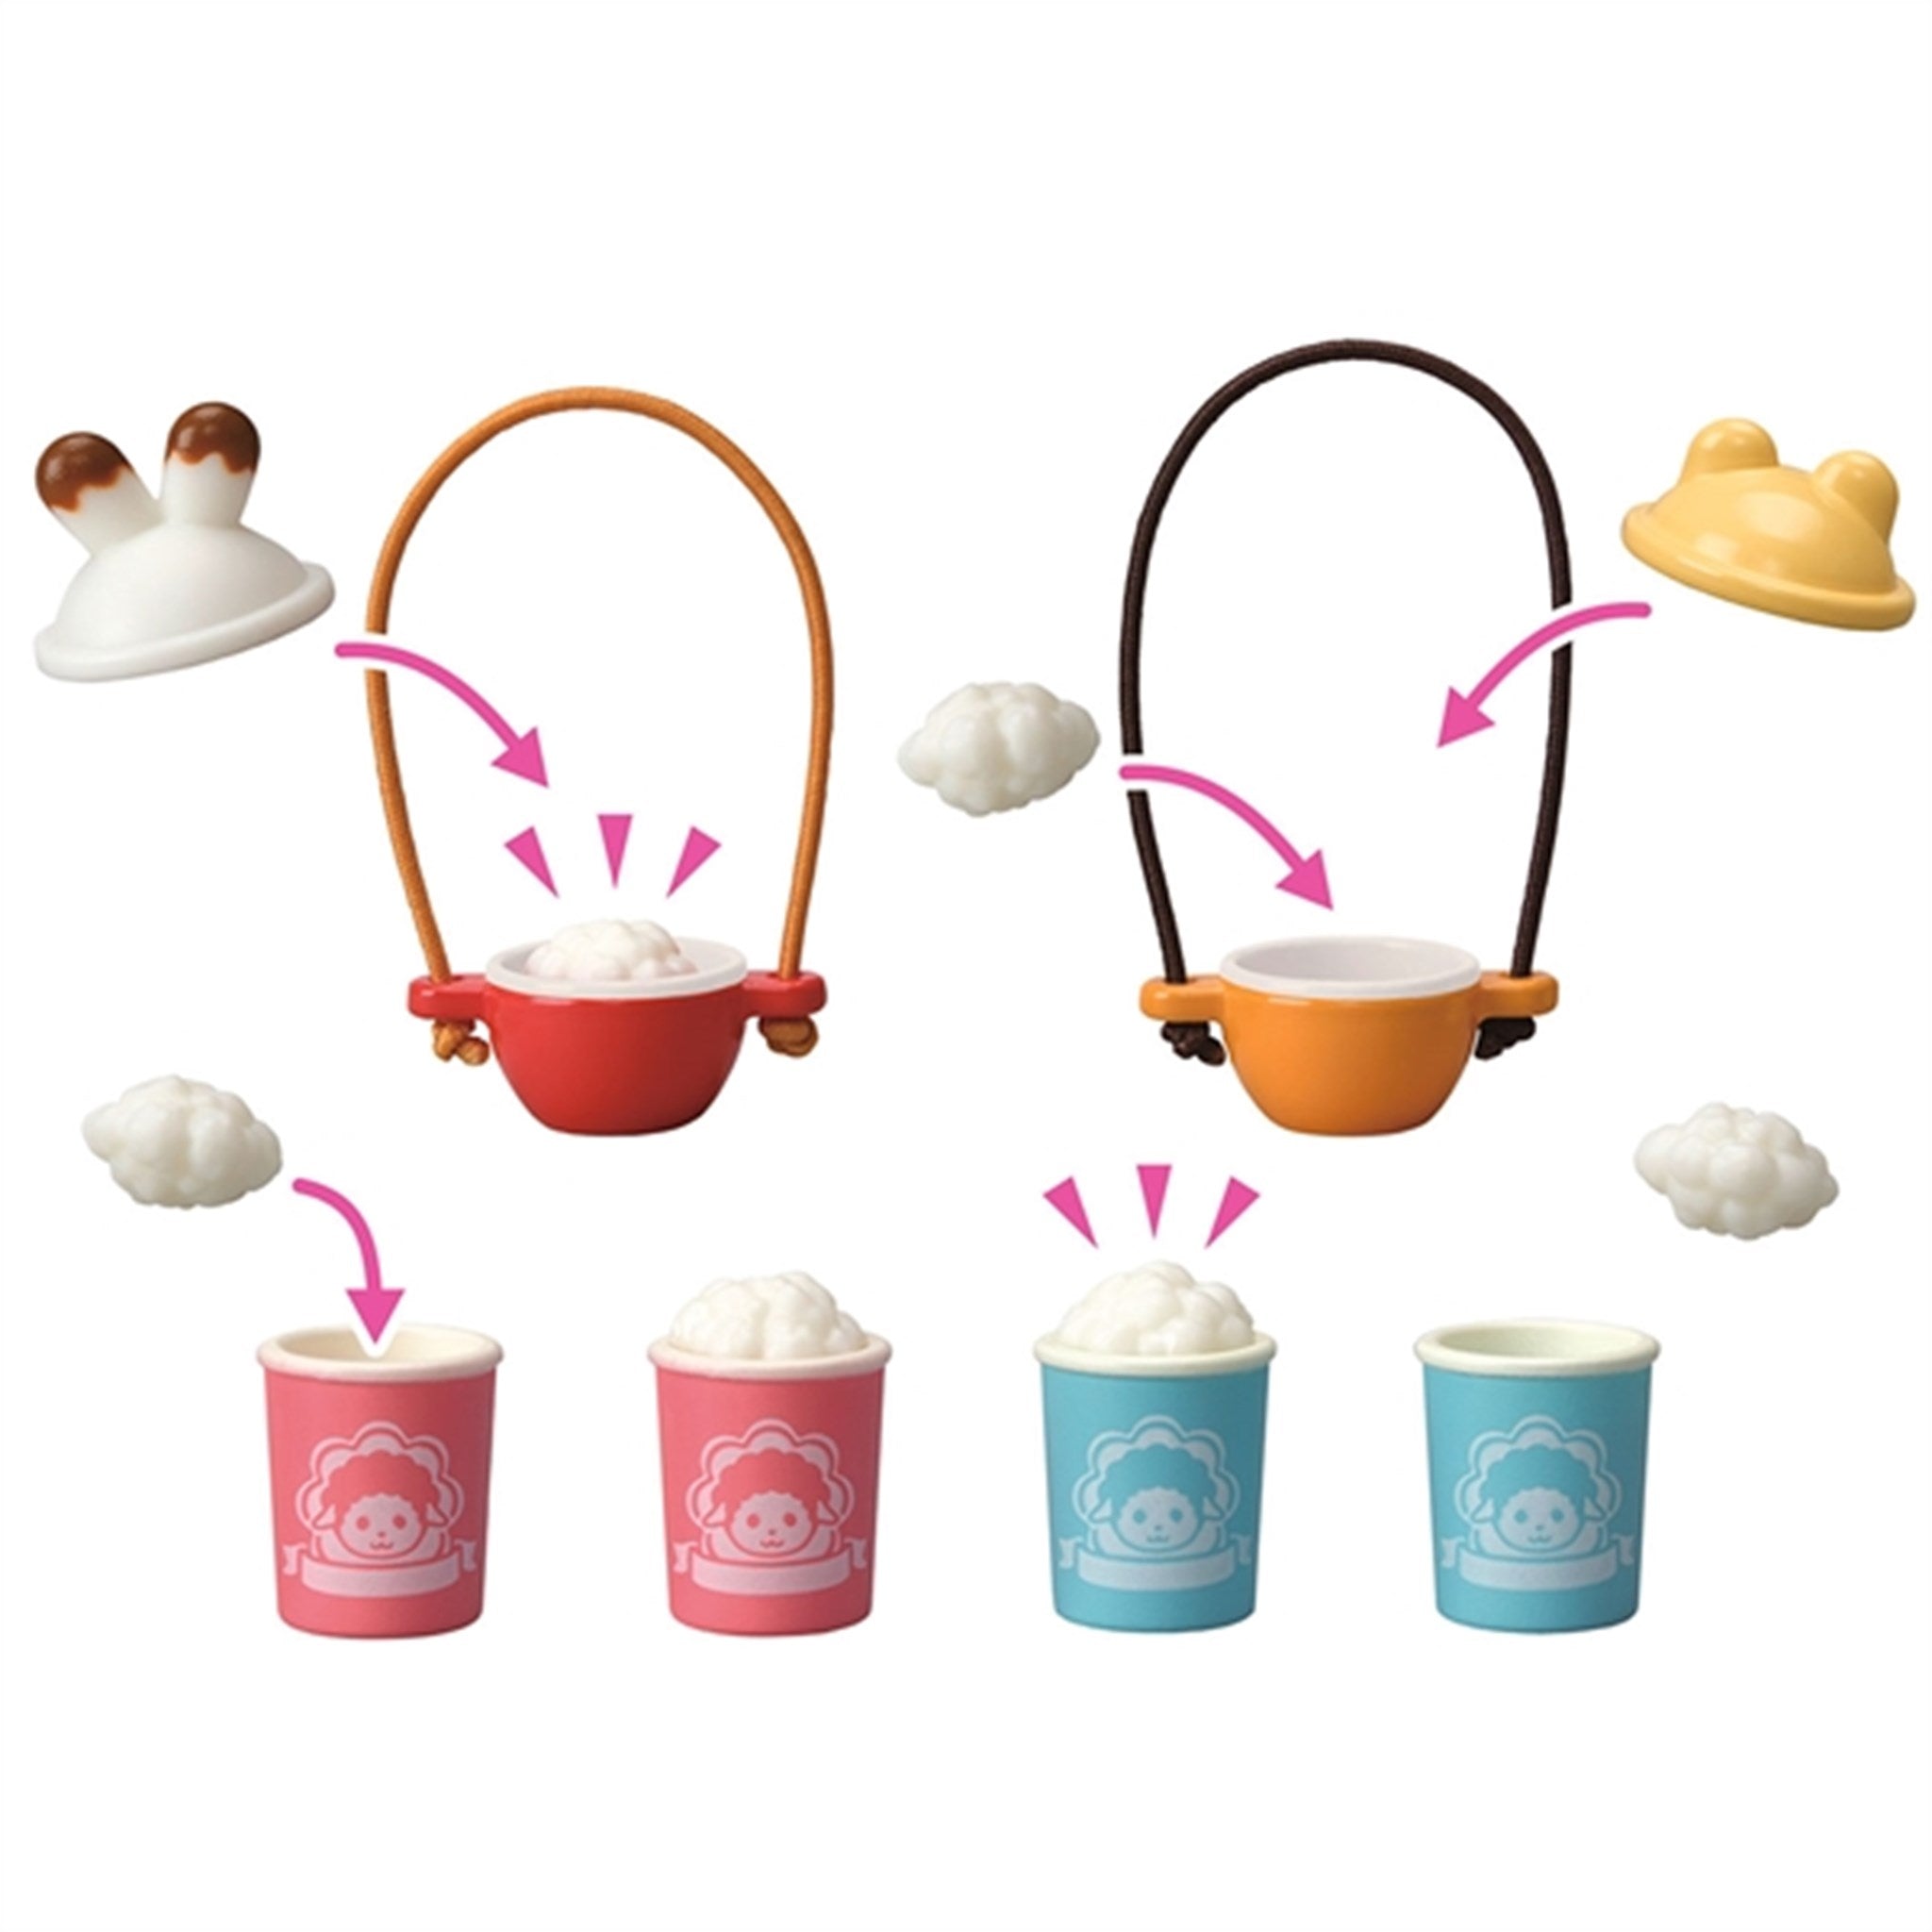 Sylvanian Families® Popcorn Delivery Service With Figur 6